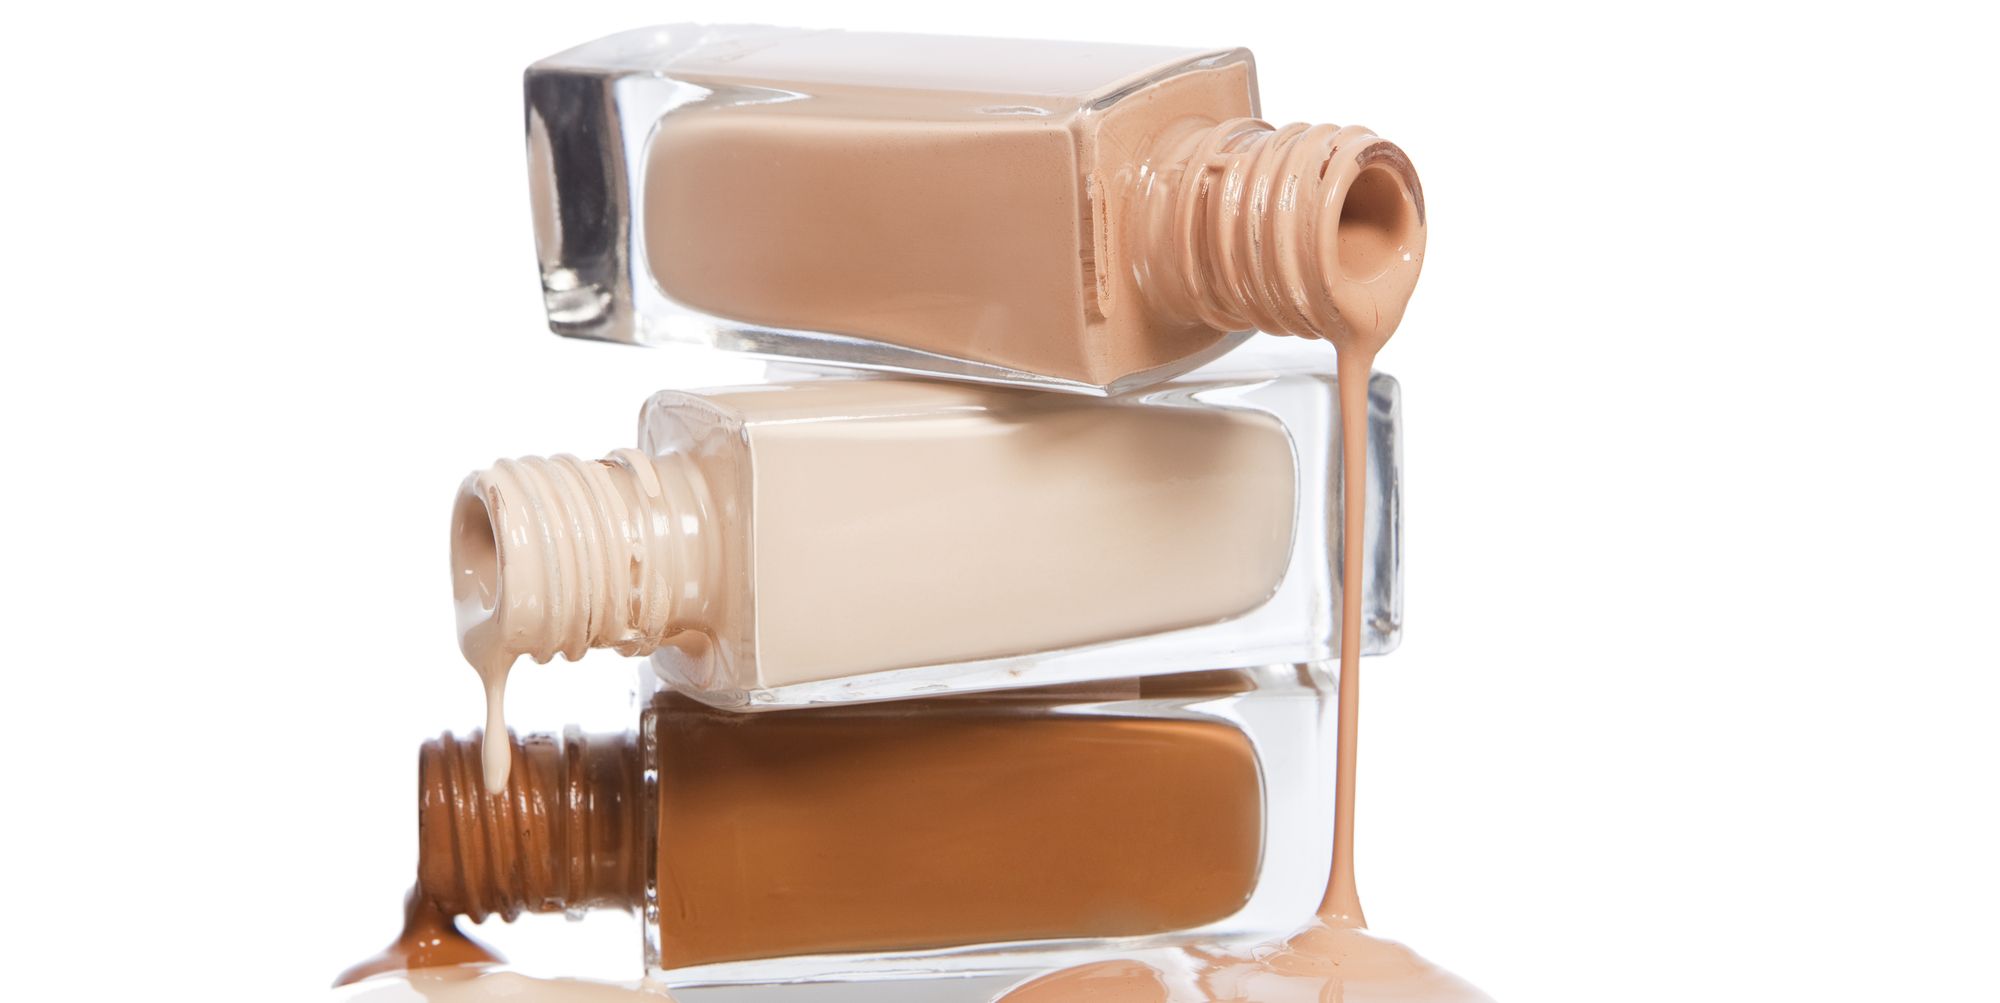 Product, Brown, Liquid, Amber, Tan, Beige, Peach, Copper, Cylinder, Still life photography, 